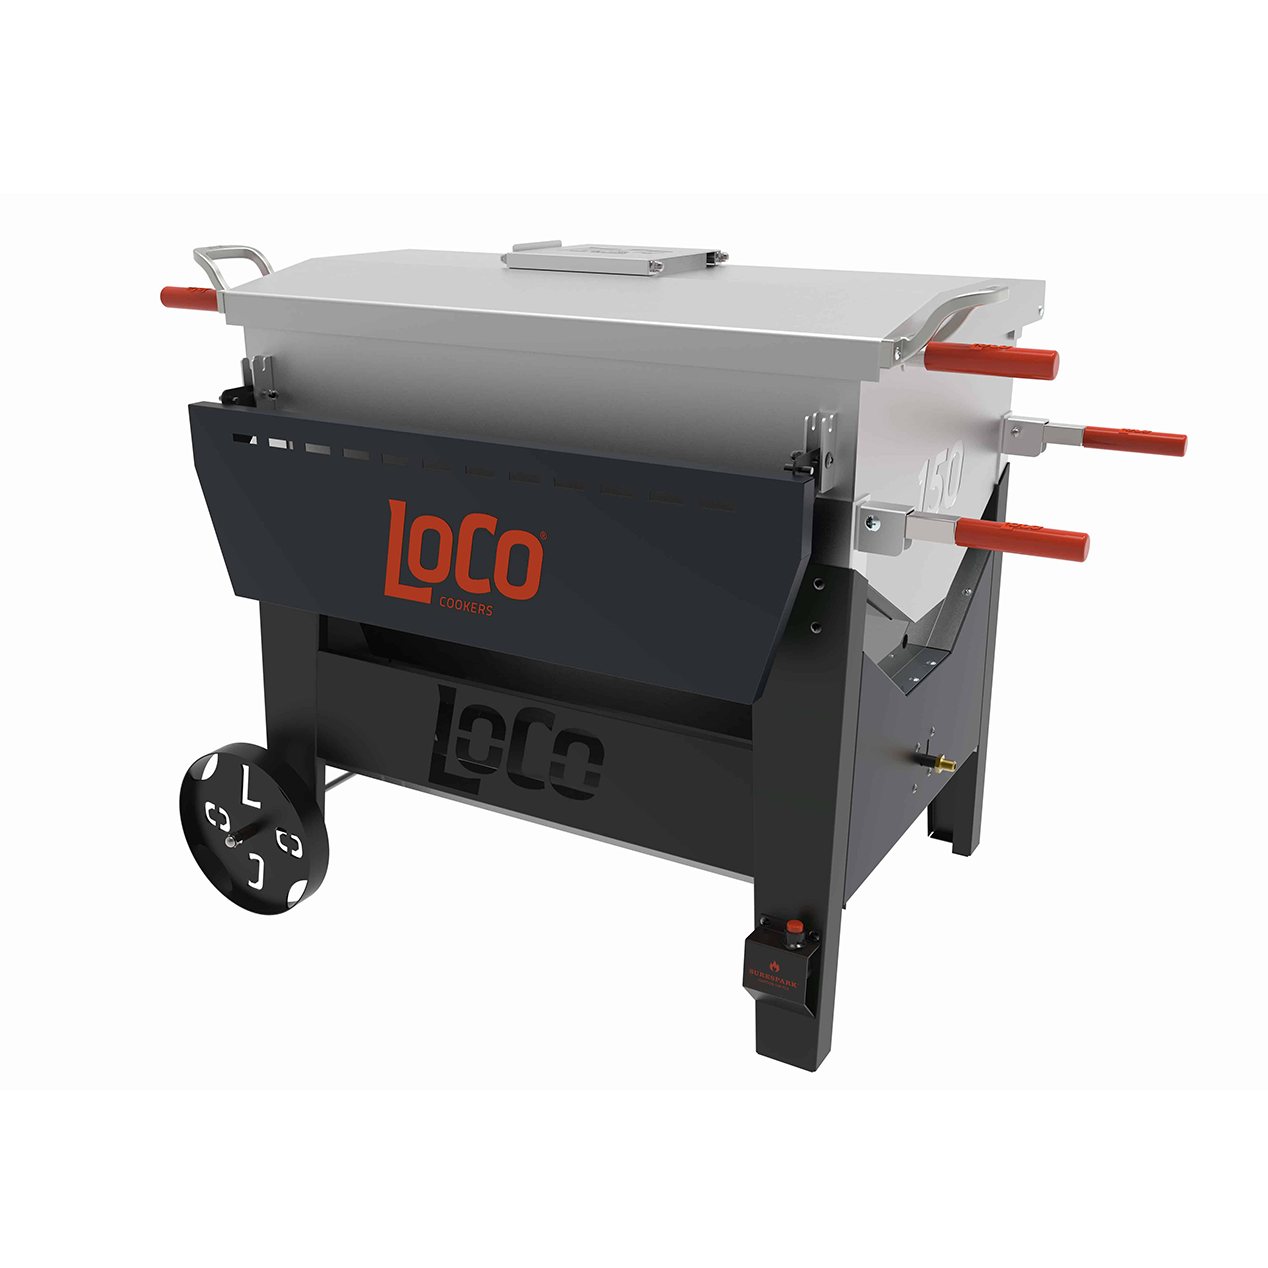 CART BOILERS - LoCo Cookers